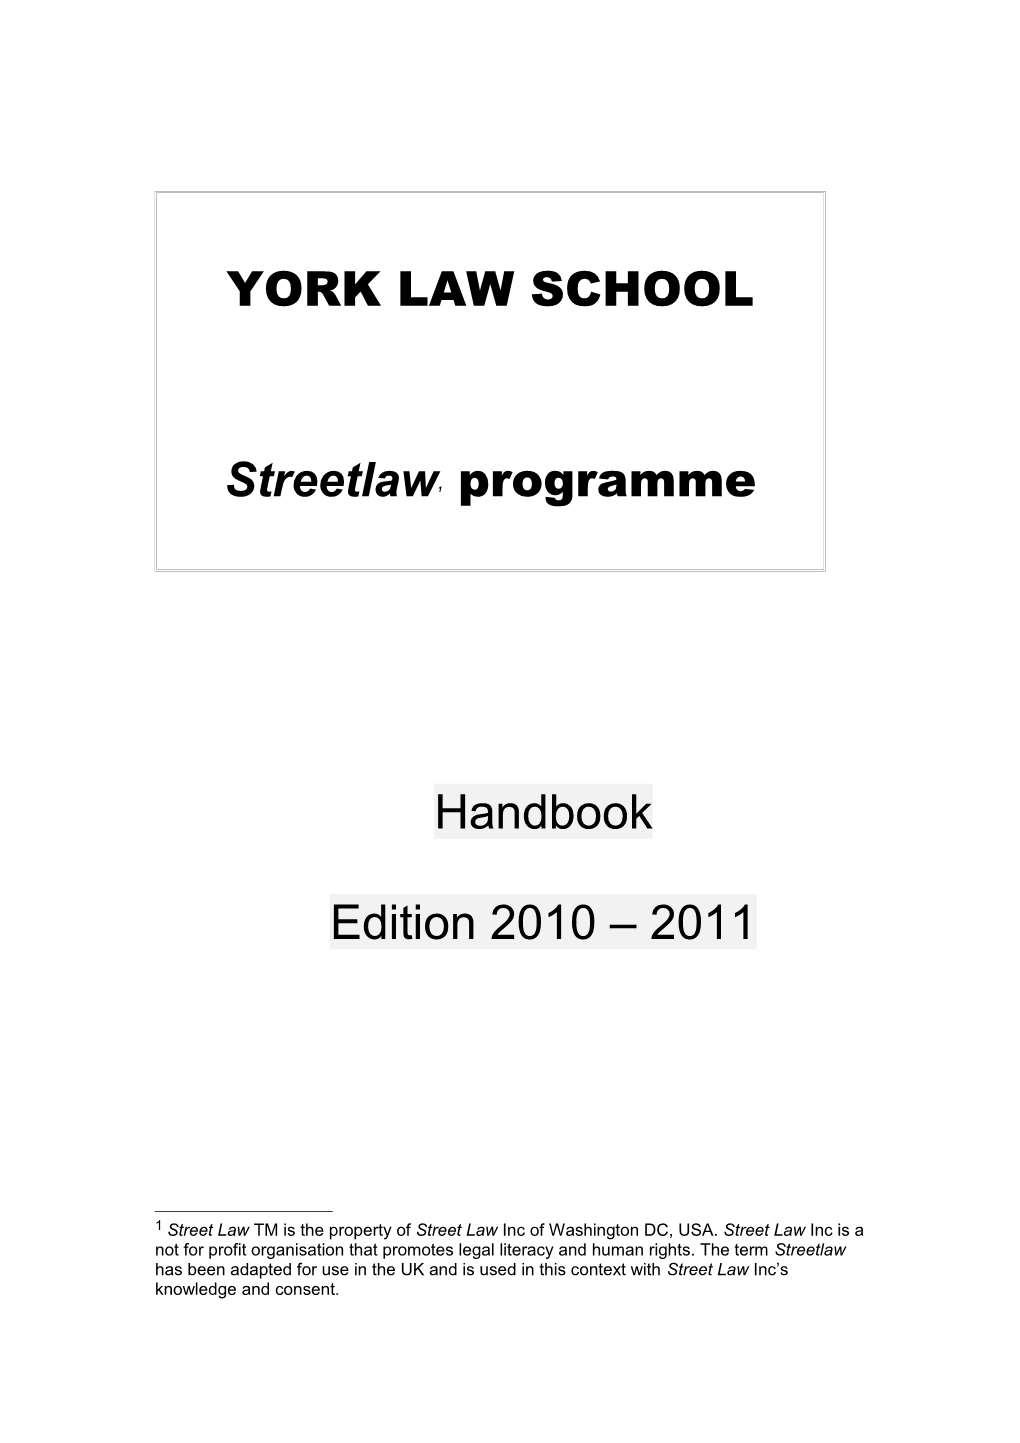 1 Welcome to York Law School and Its Clinical Programme. Pages 4-7